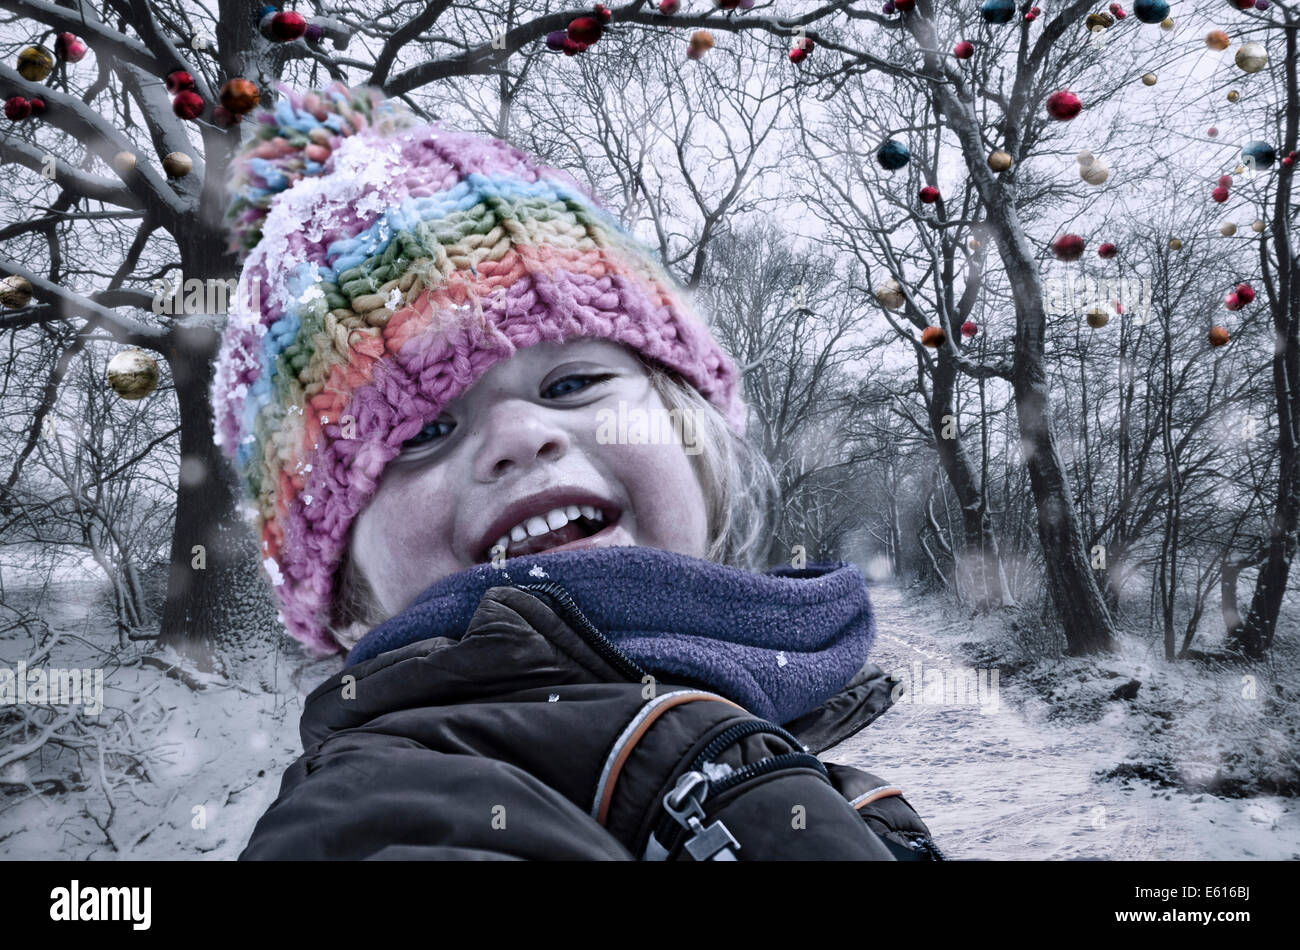 Girl in winter clothing, in front of trees with Christmas baubles Stock Photo